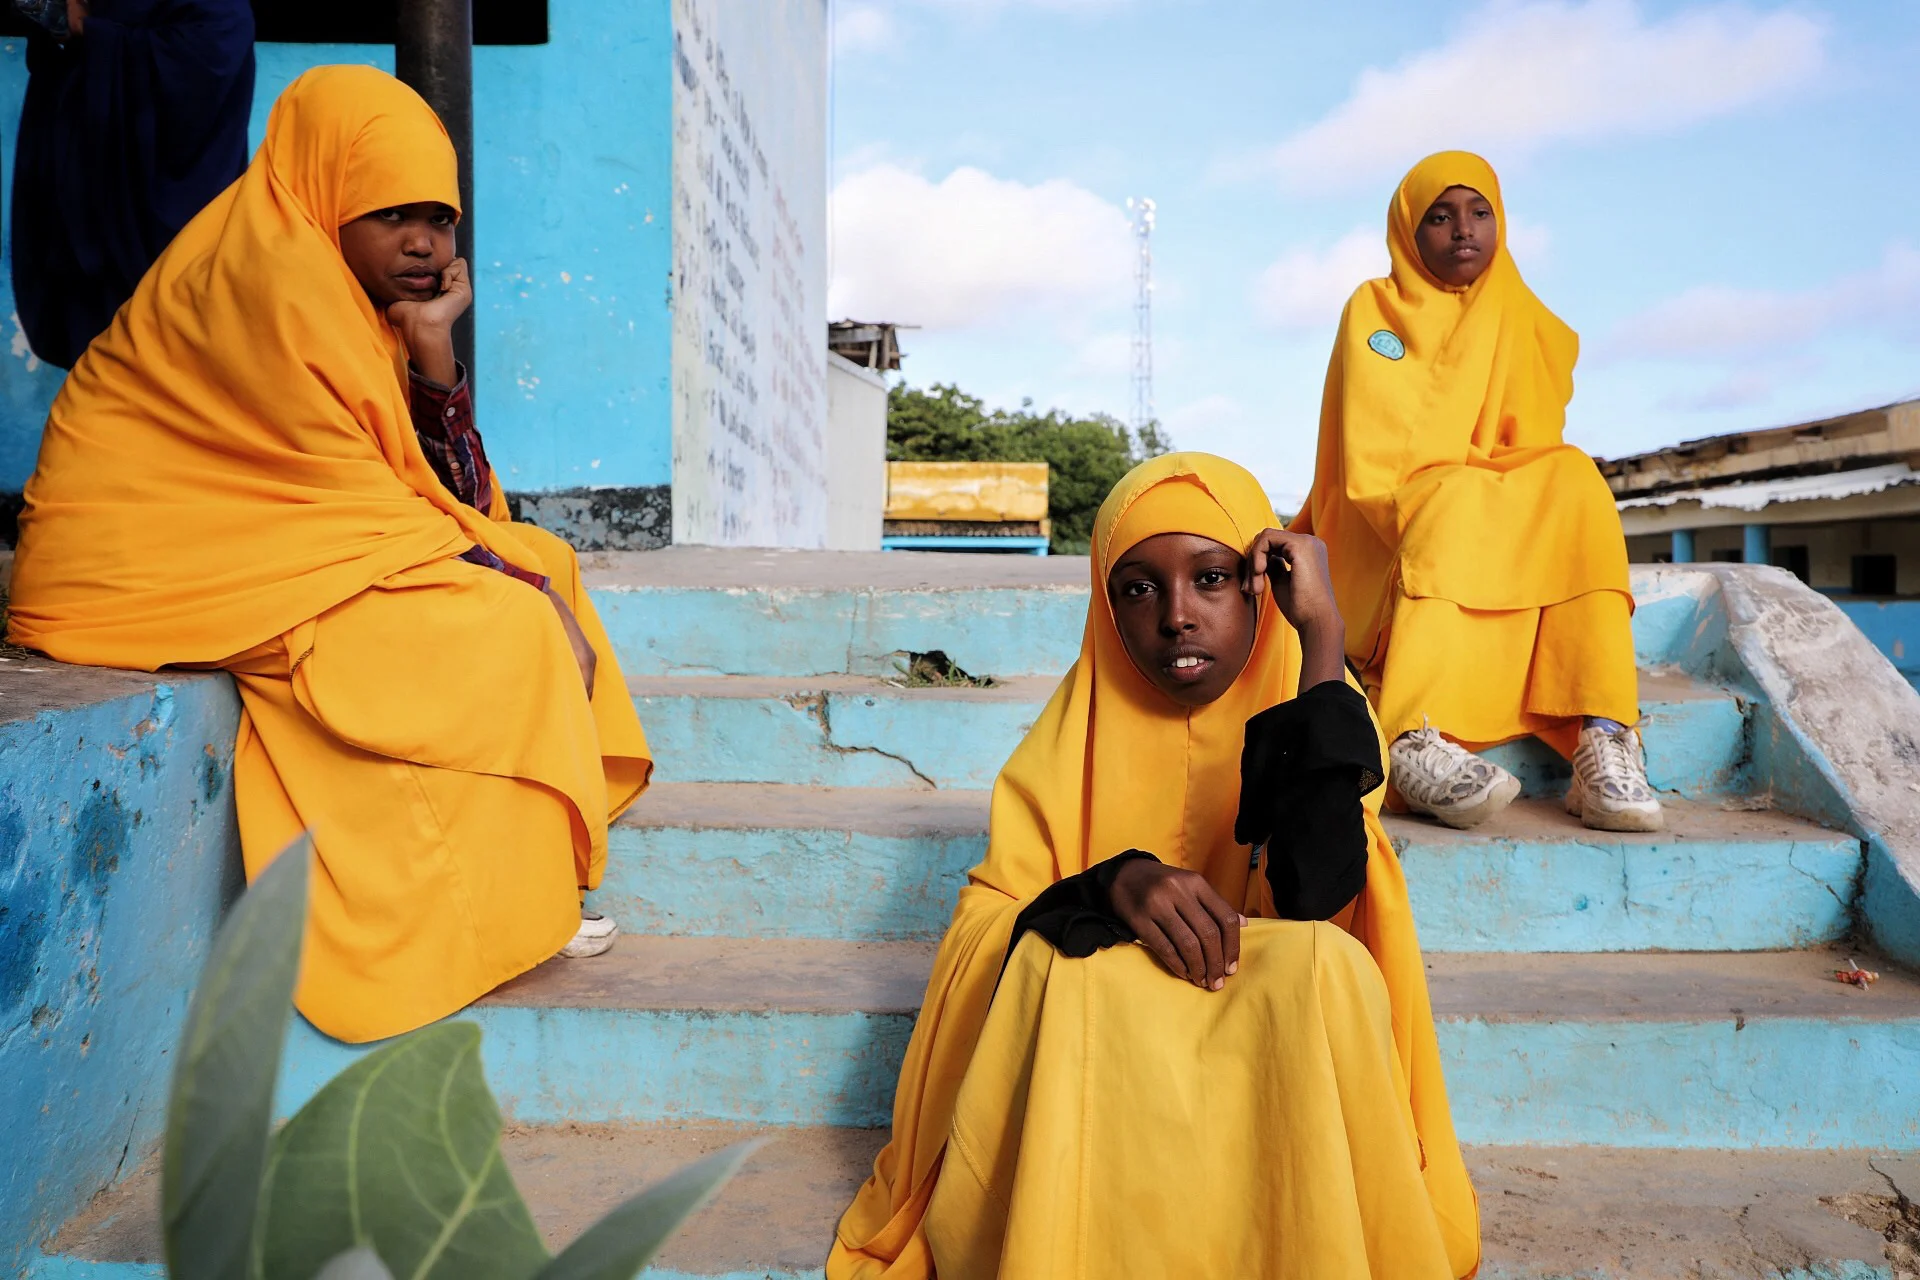 School girls pose for a photo after class in Mogadishu, Somalia